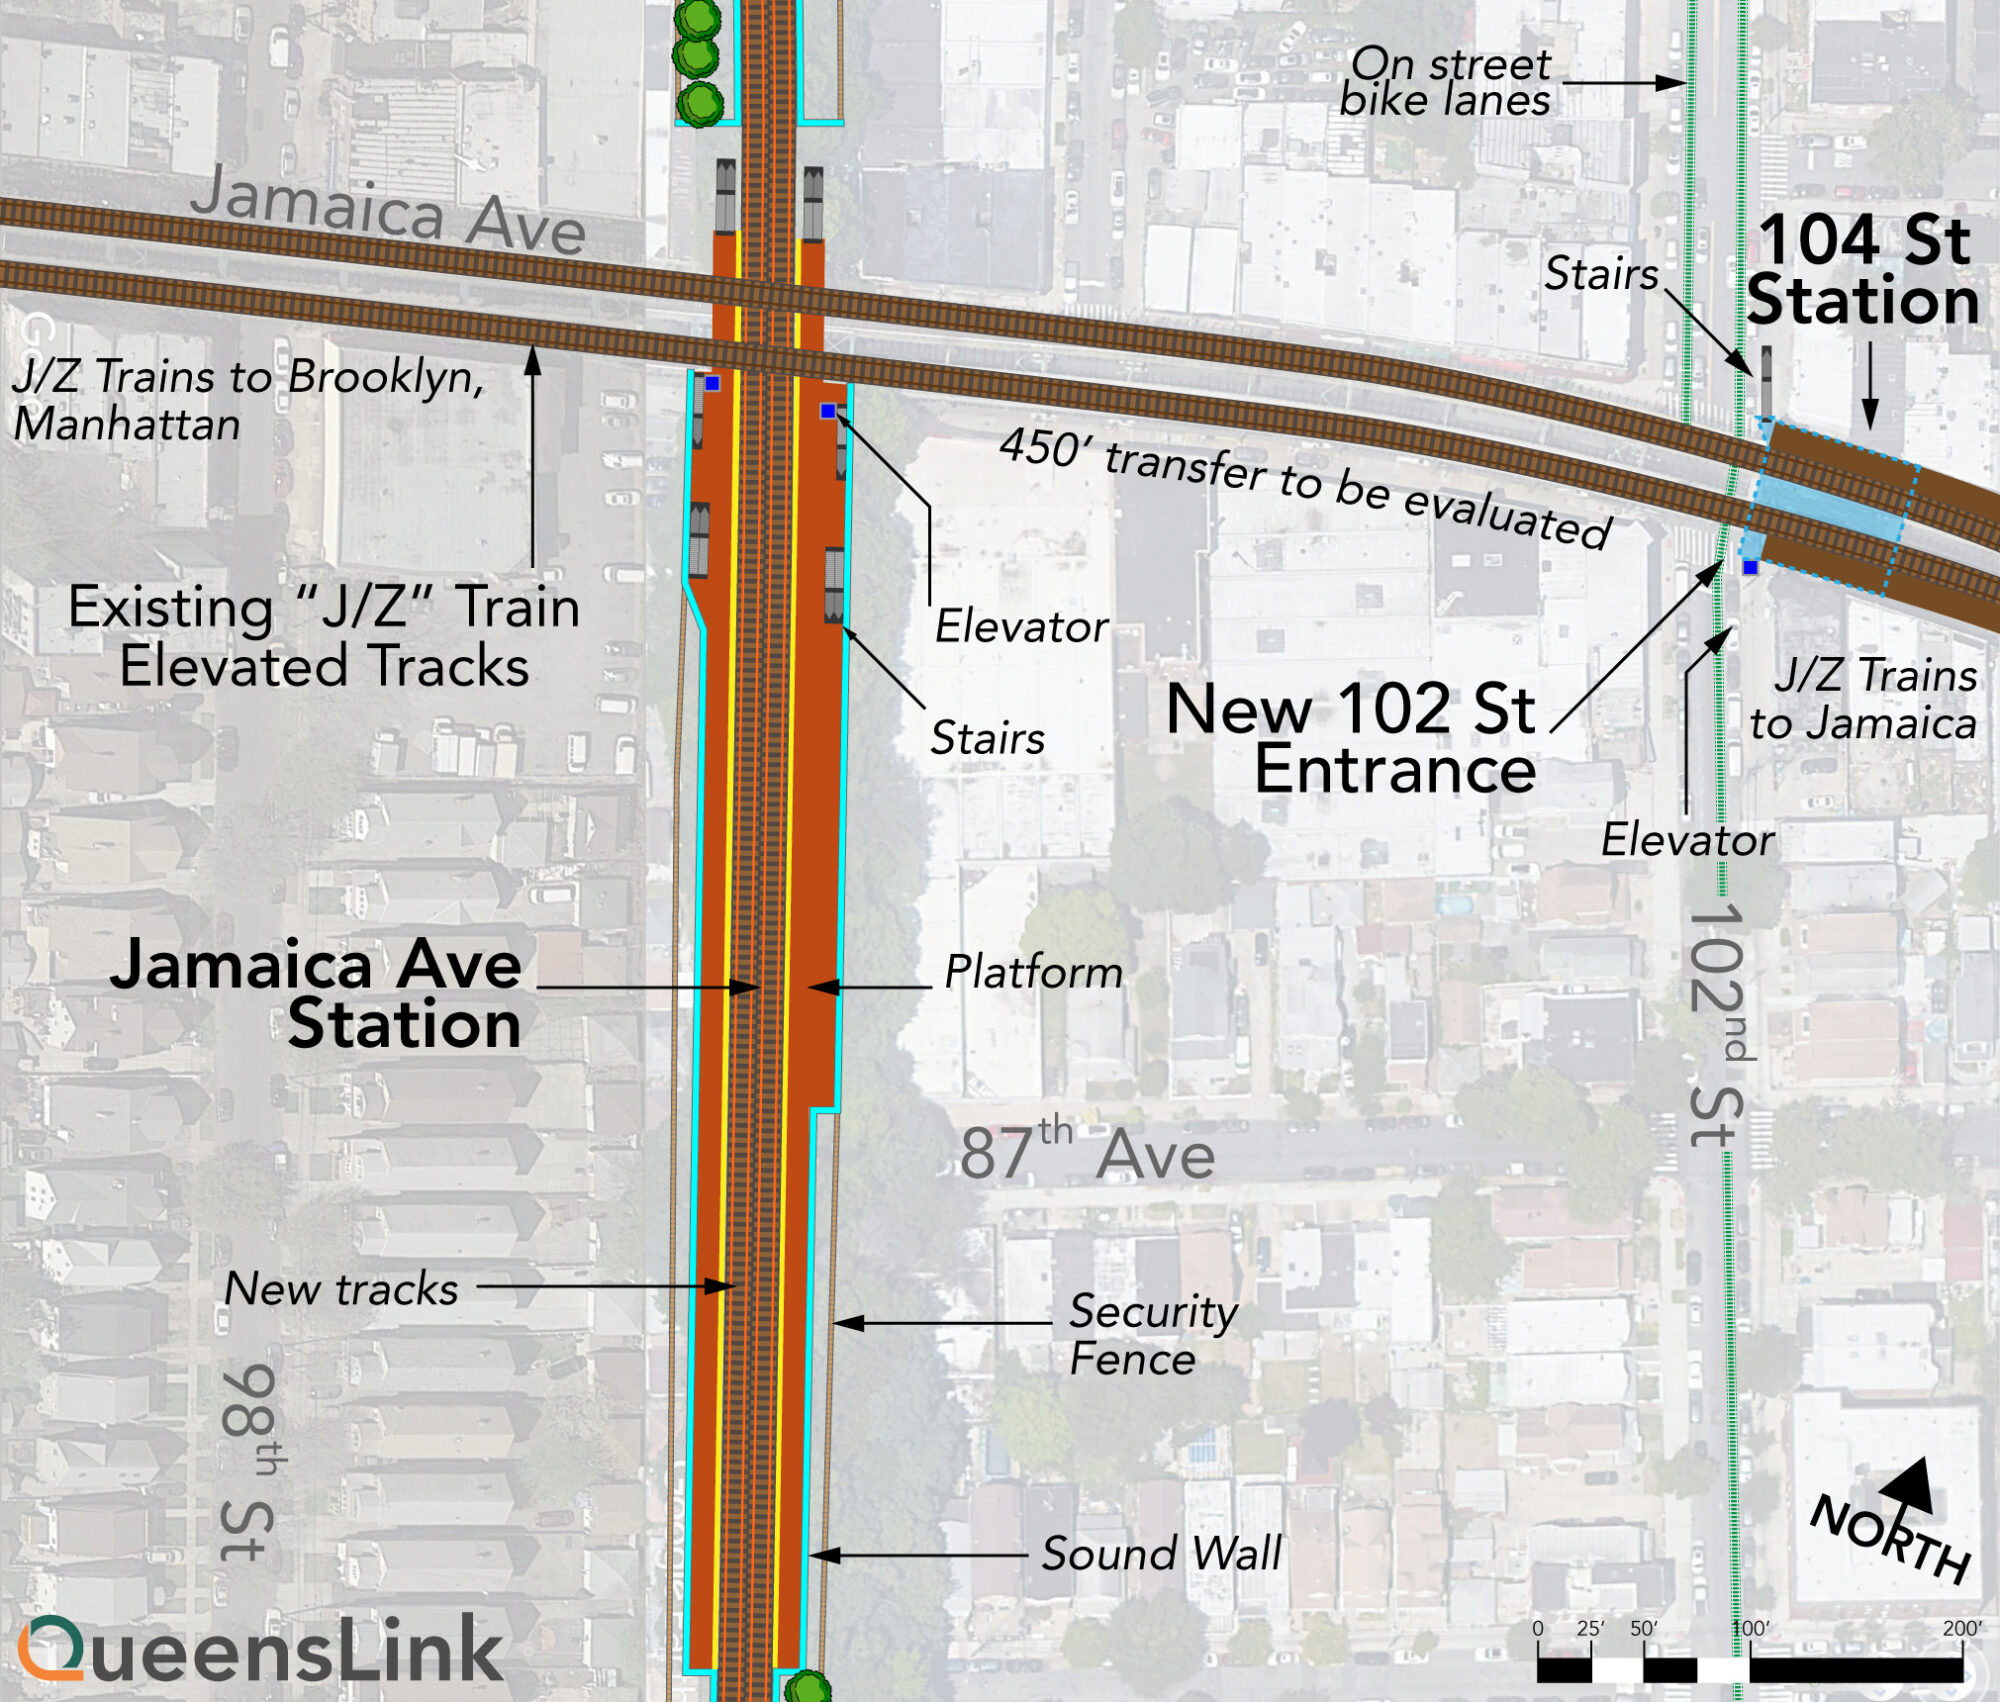 Site plan of Jamaica Ave station and new 102nd St entrance.